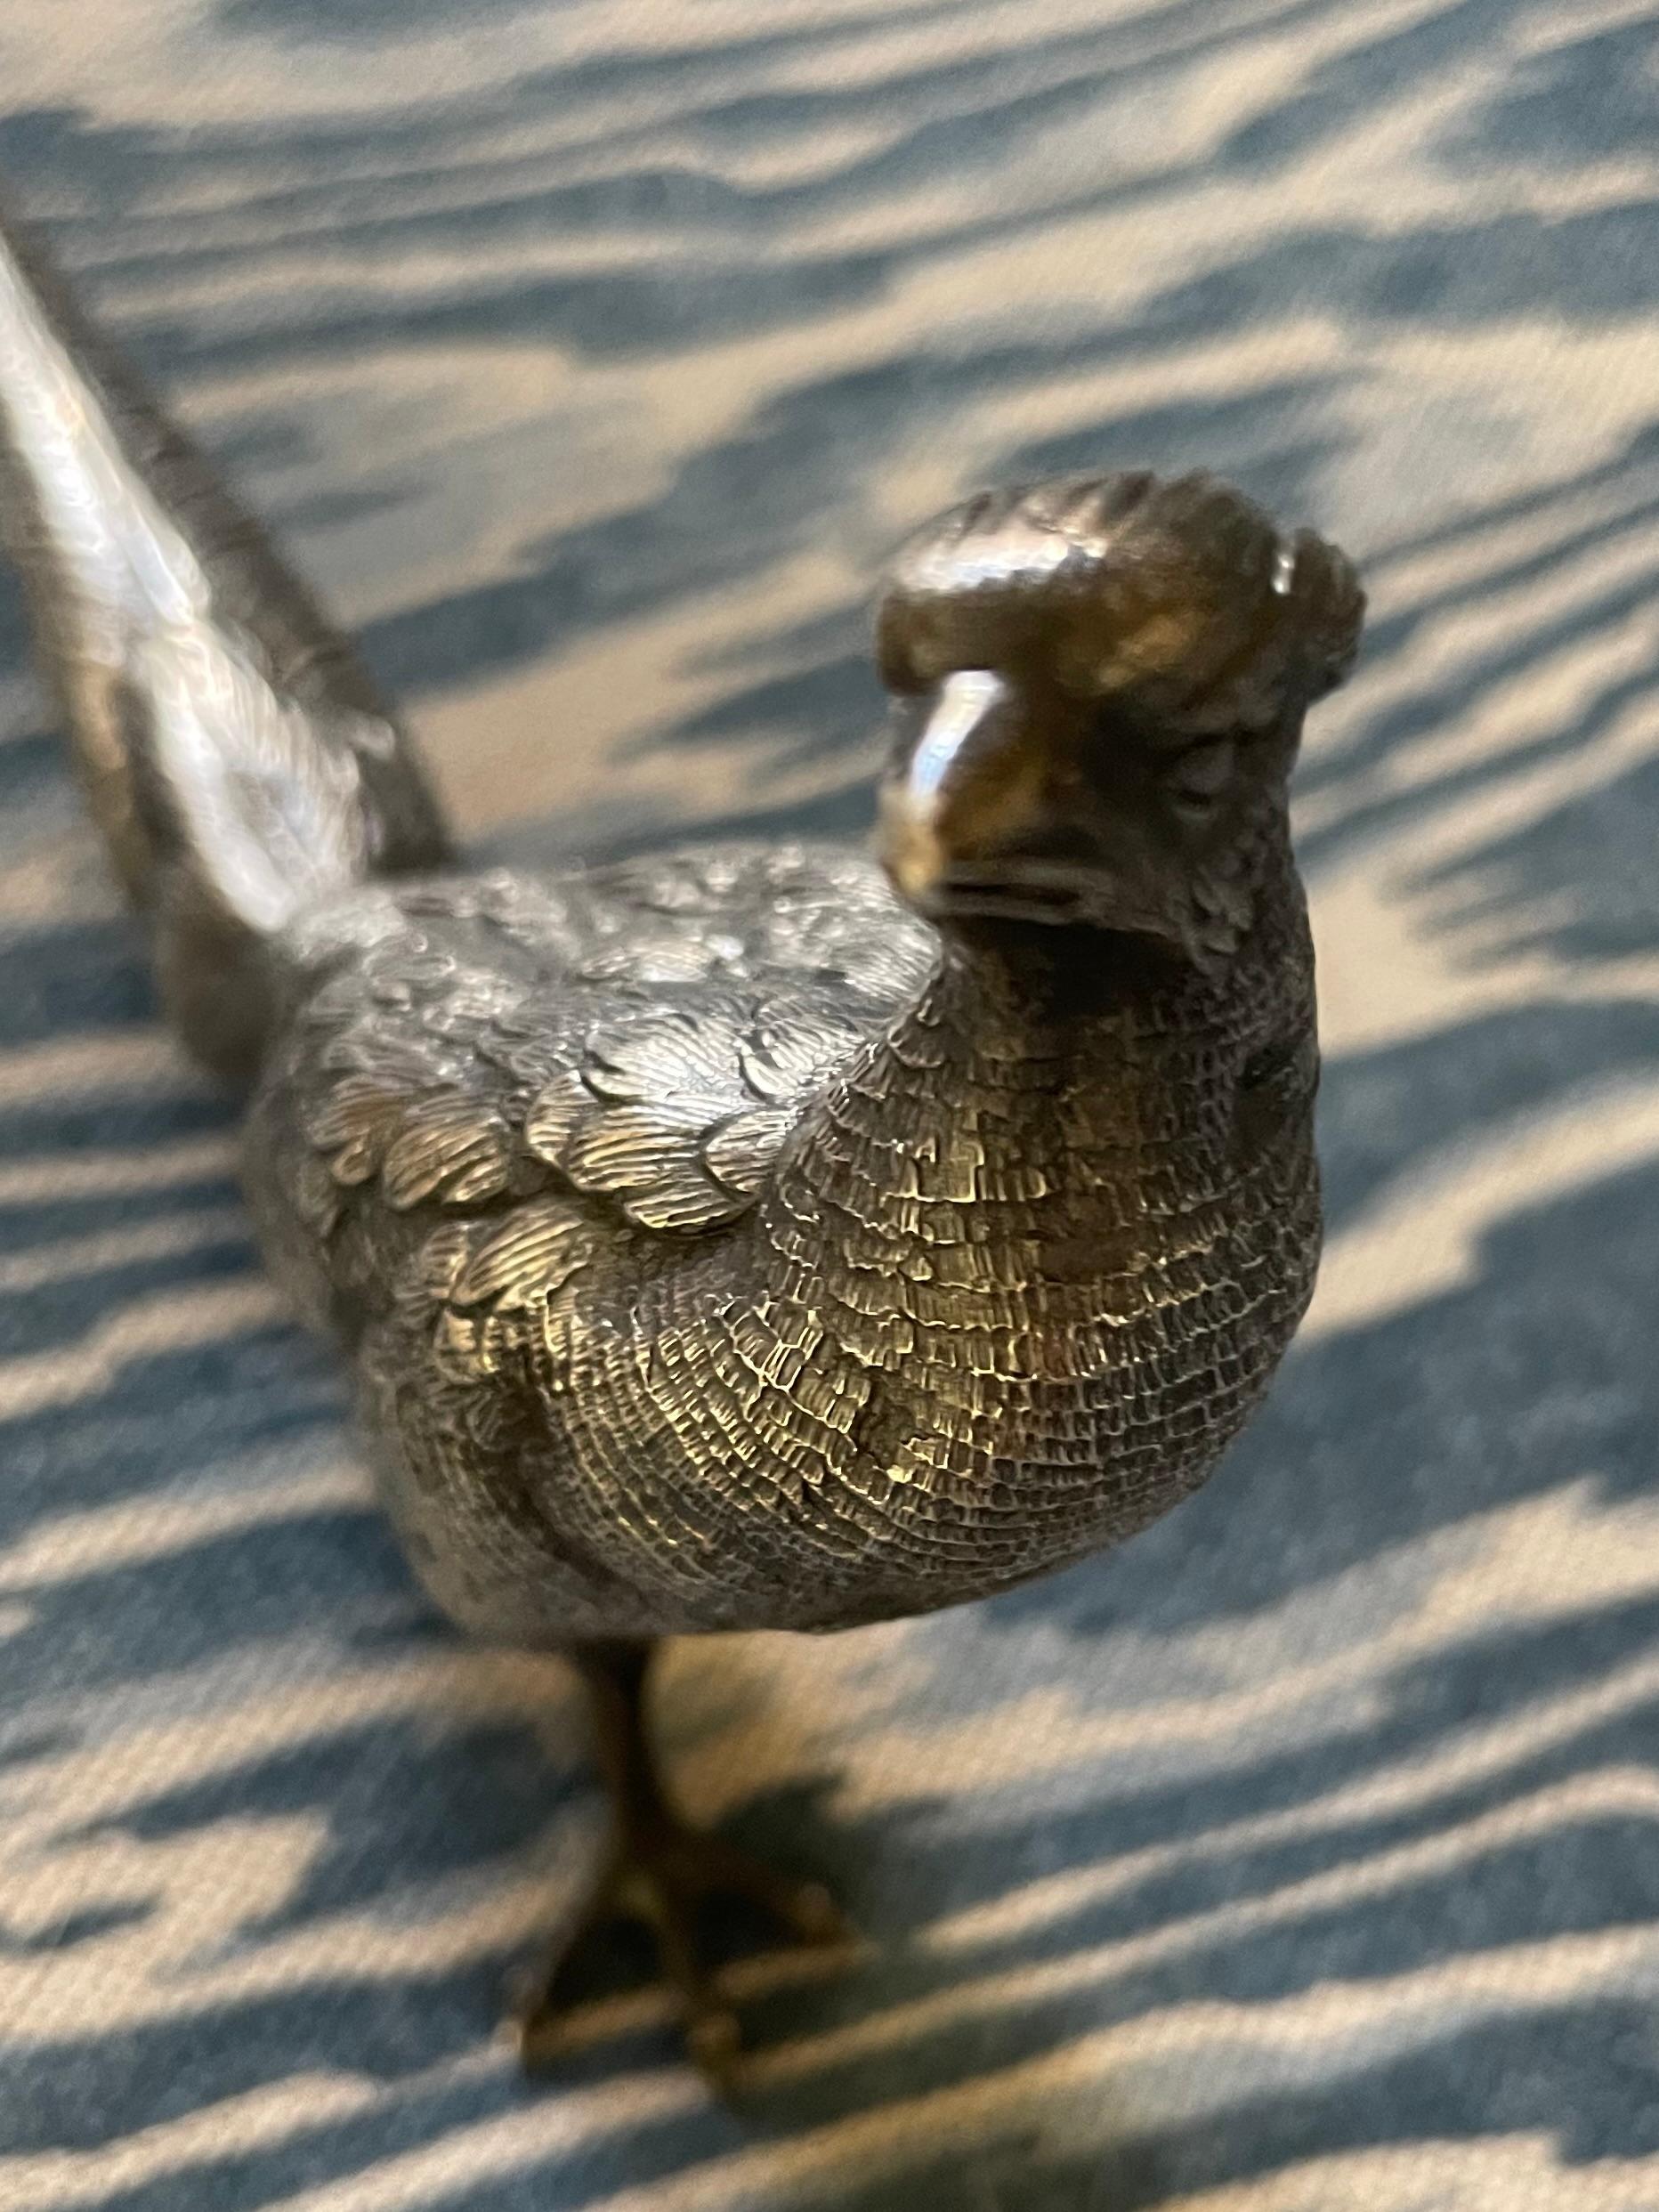 Italian silver pheasant table ornament. Realistically modeled sterling silver pheasant sculpture from the famed Argenteria Miracoli Milano. Silver markings 